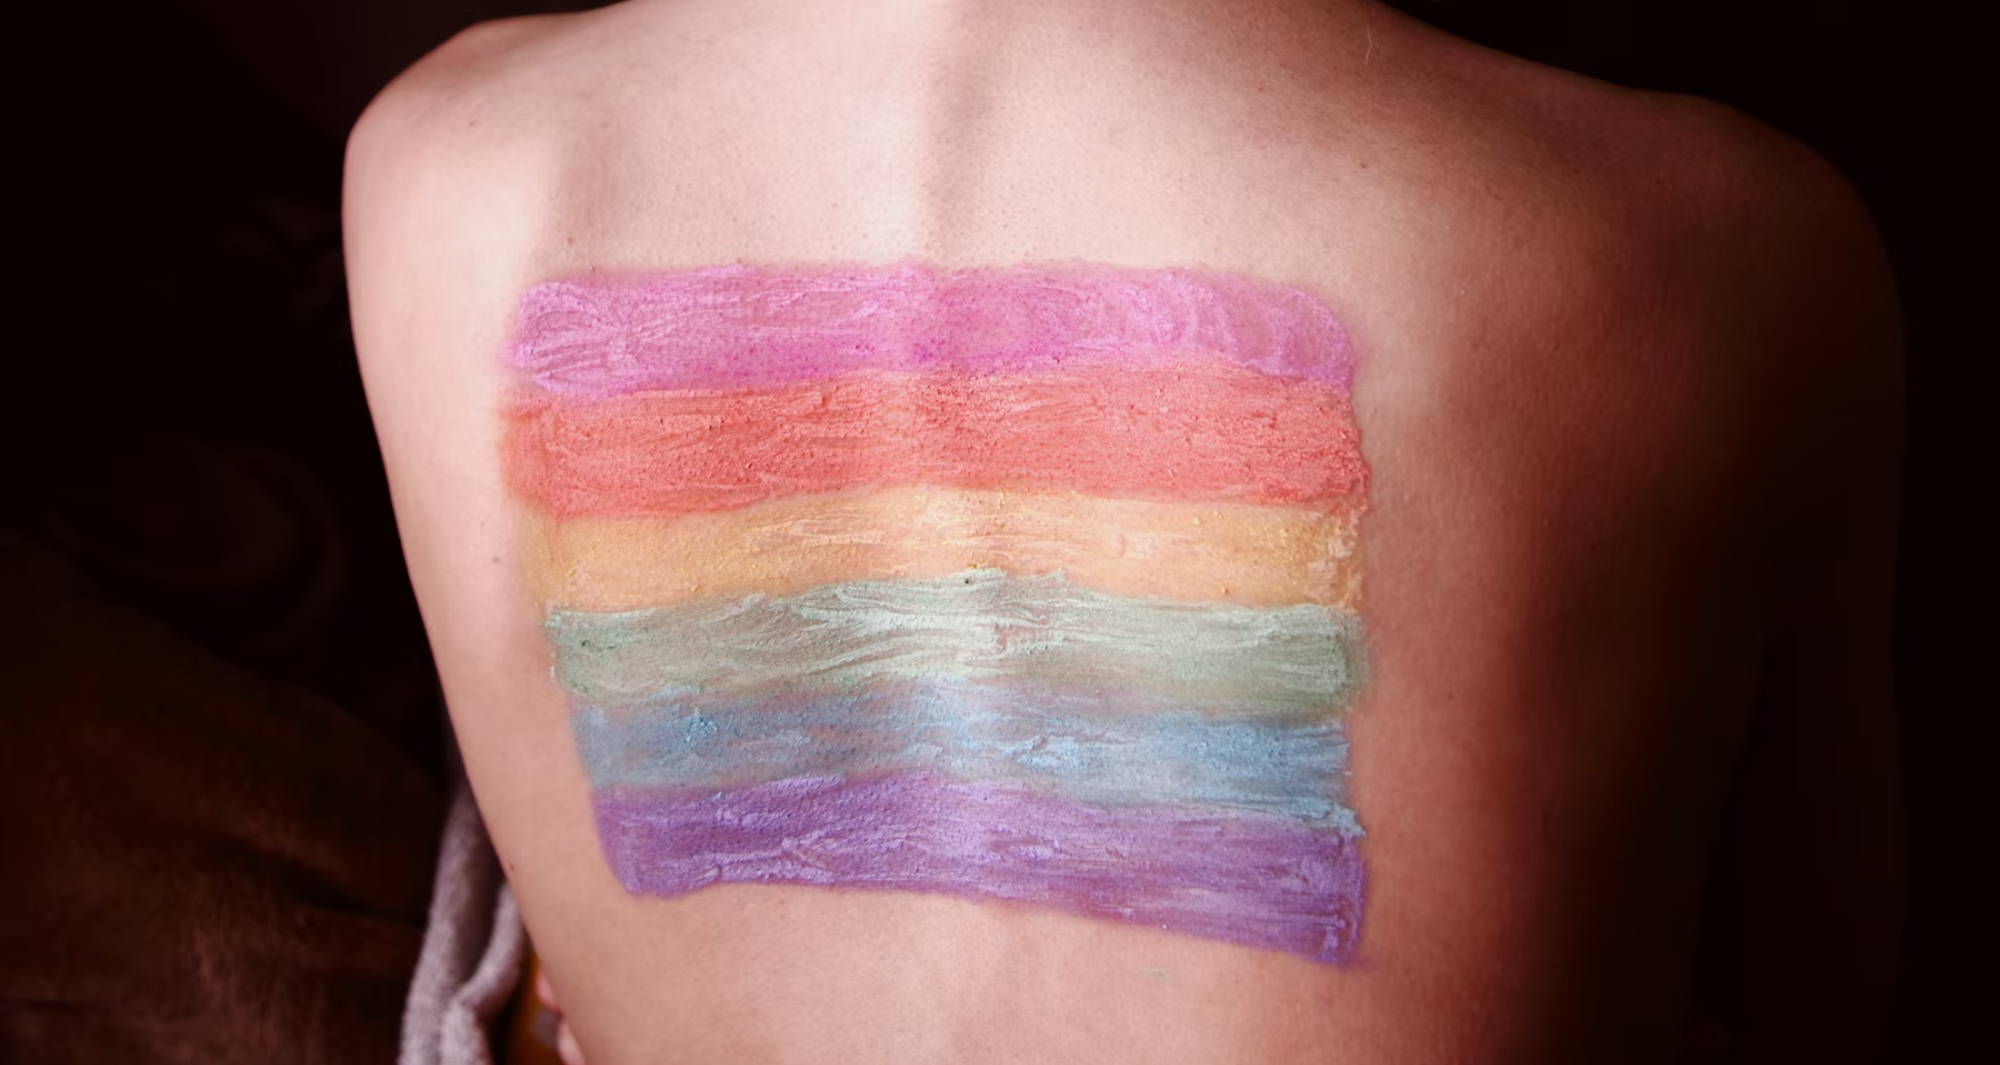  woman’s back with scoliosis with a rainbow flag painted on it